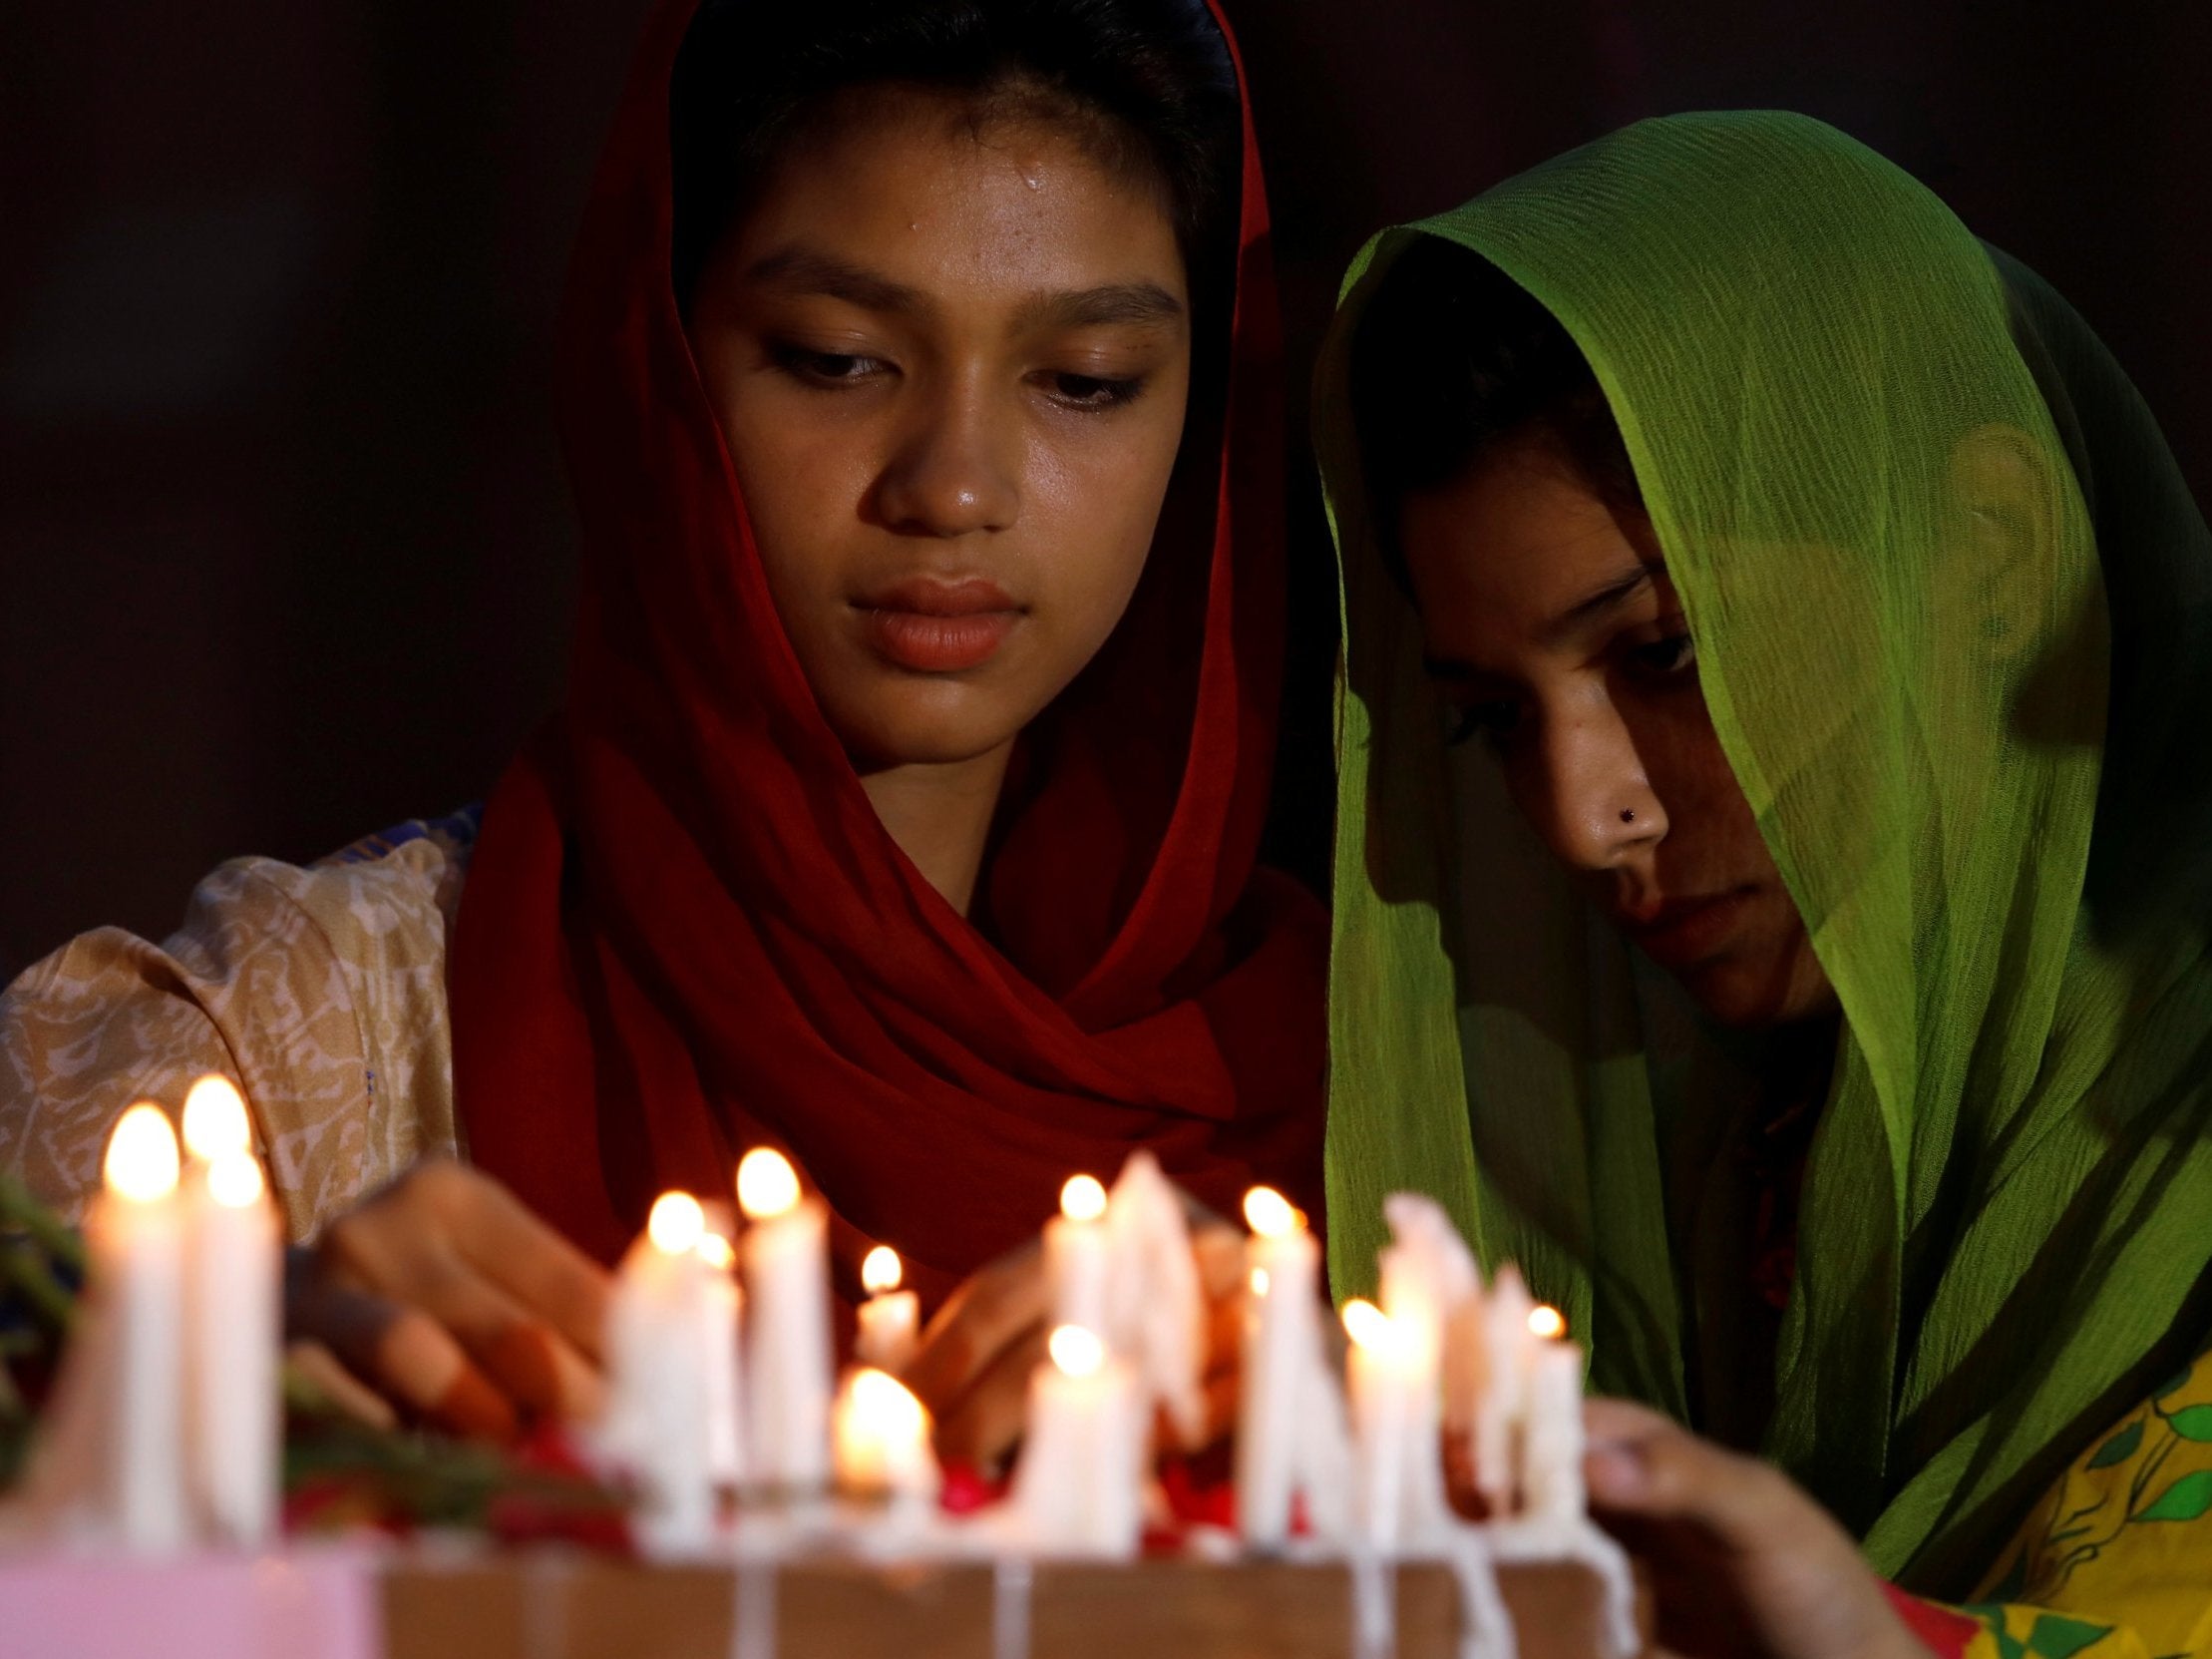 People light candles for the victims of Sri Lanka’s serial bomb blasts, outside a church in Peshawar, Pakistan